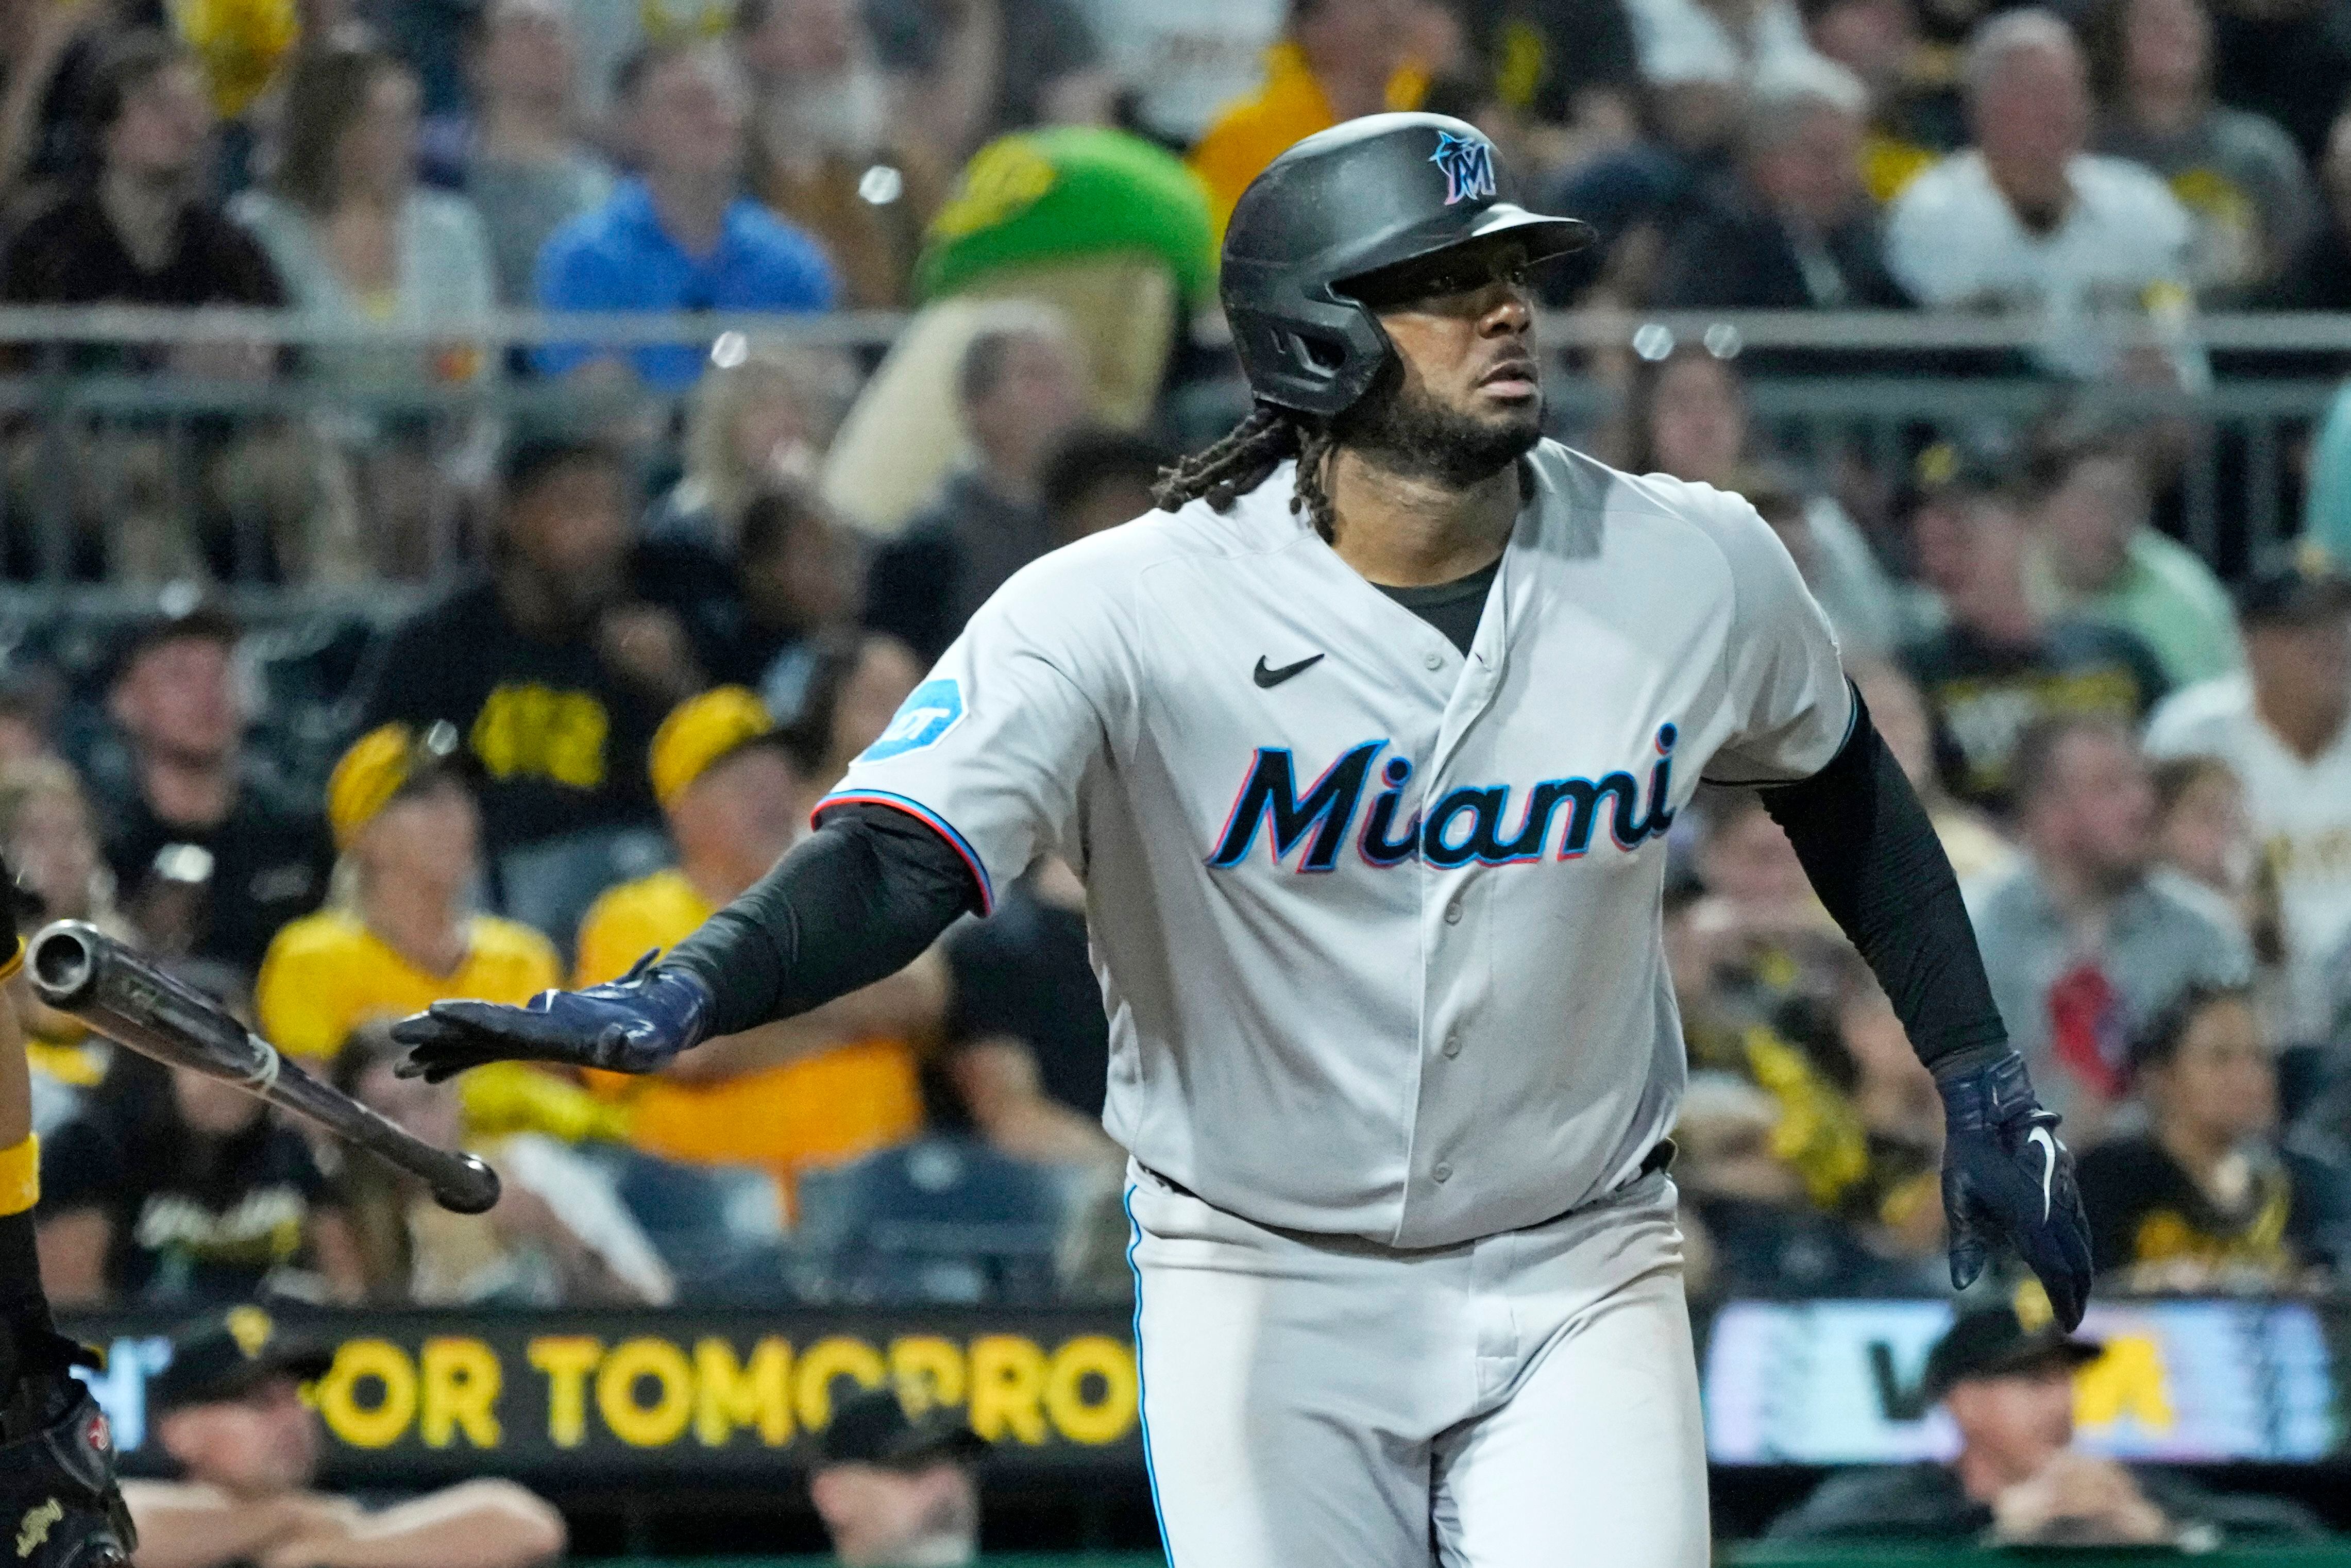 Jon Berti gives Marlins walk-off win over Pirates in 11